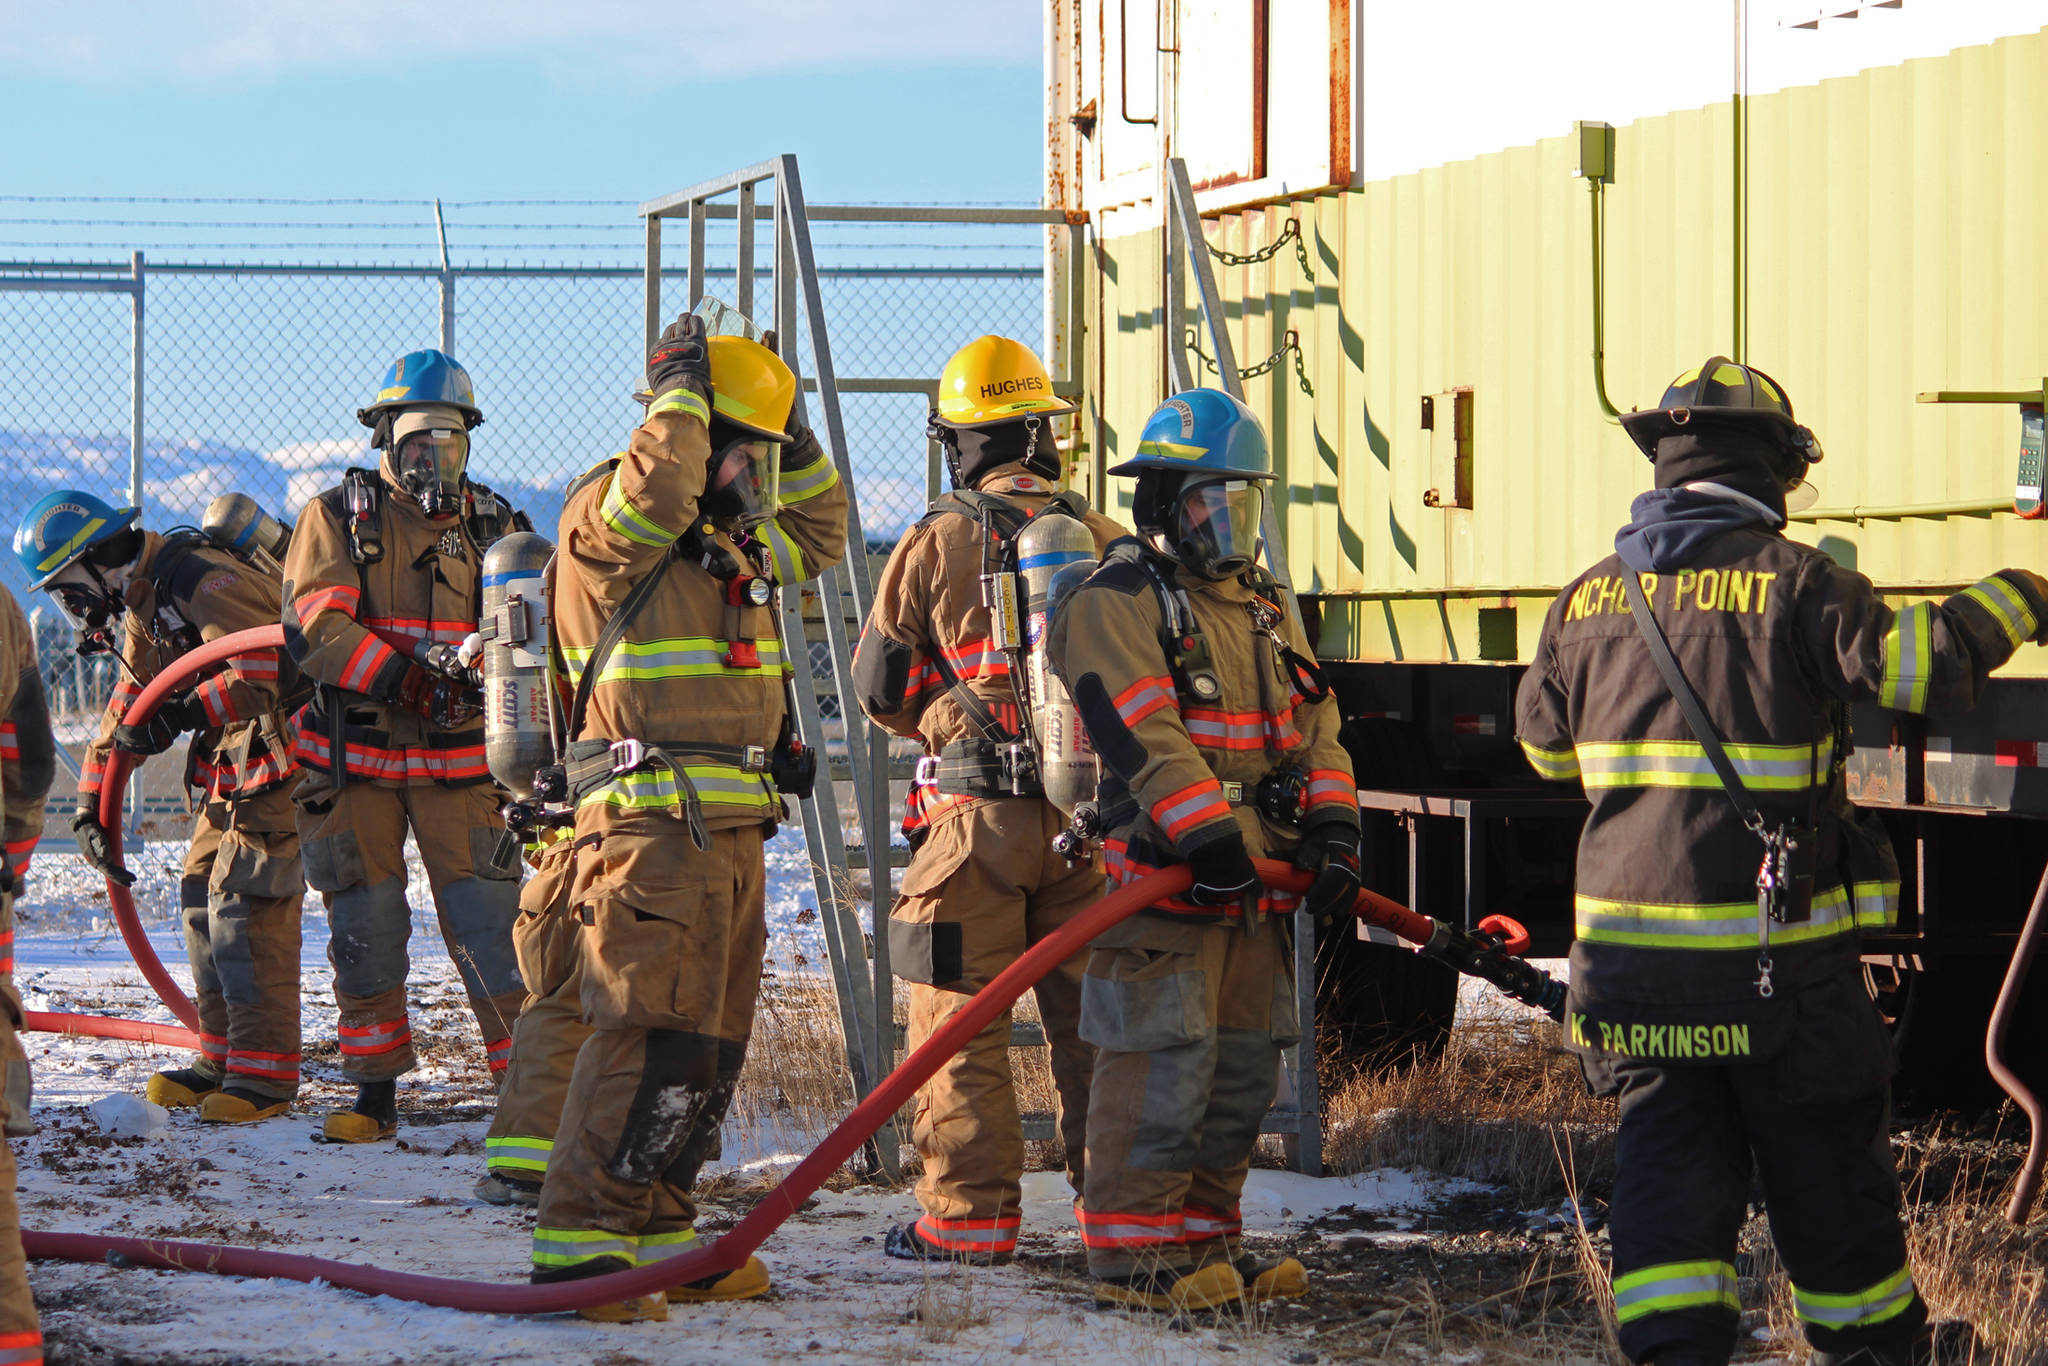 Firefighters from multiple agencies prepare to enter a structure with a fire burning inside it as part of a live fire exercise Saturday, Feb. 23, 2019 at the Homer Volunteer Fire Department’s fire training facility on Freight Dock Road in Homer, Alaska. Student volunteers rom Anchor Point Emergency Services, Homer Volunteer Fire Department, Ninilchik Emergency Services, and Central Emergency Services attended the drill as part of a joint Firefighter I class they are attending hosted by Anchor Point Fire and HVFD. (Photo by Megan Pacer/Homer News)